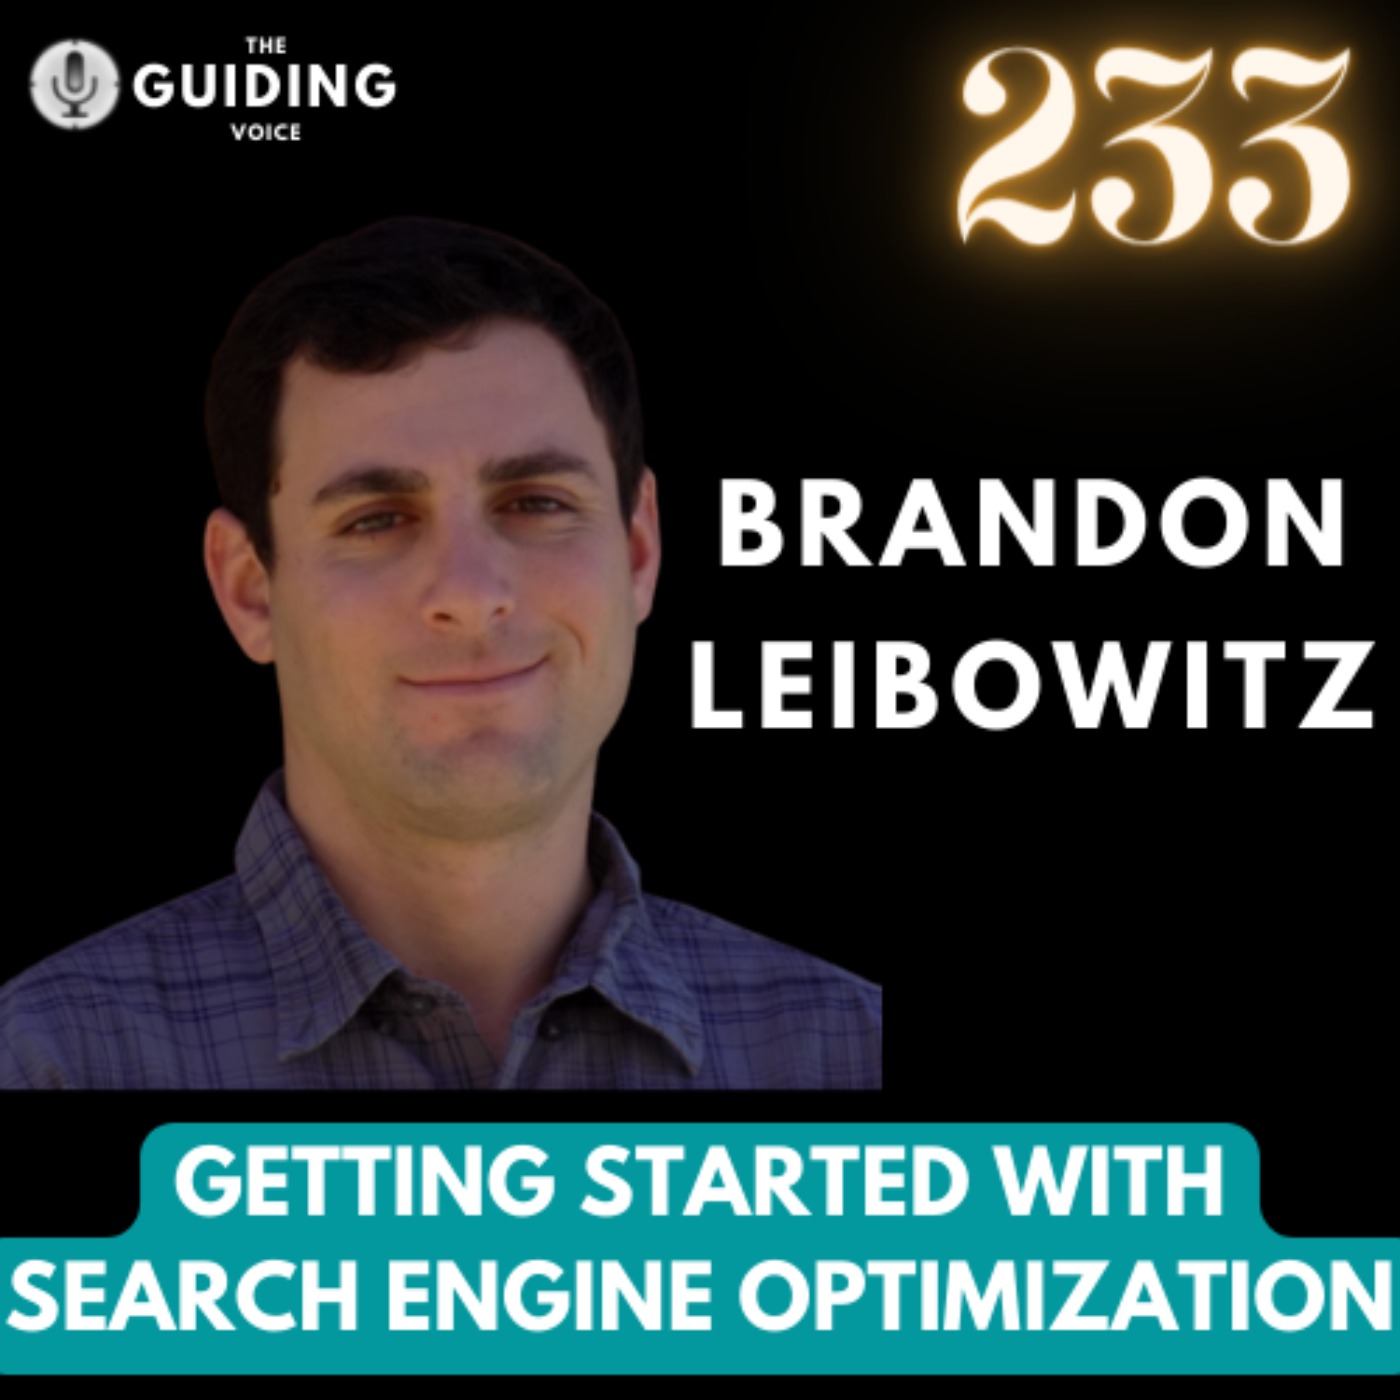 Getting started with SEO (Search Engine Optimization)